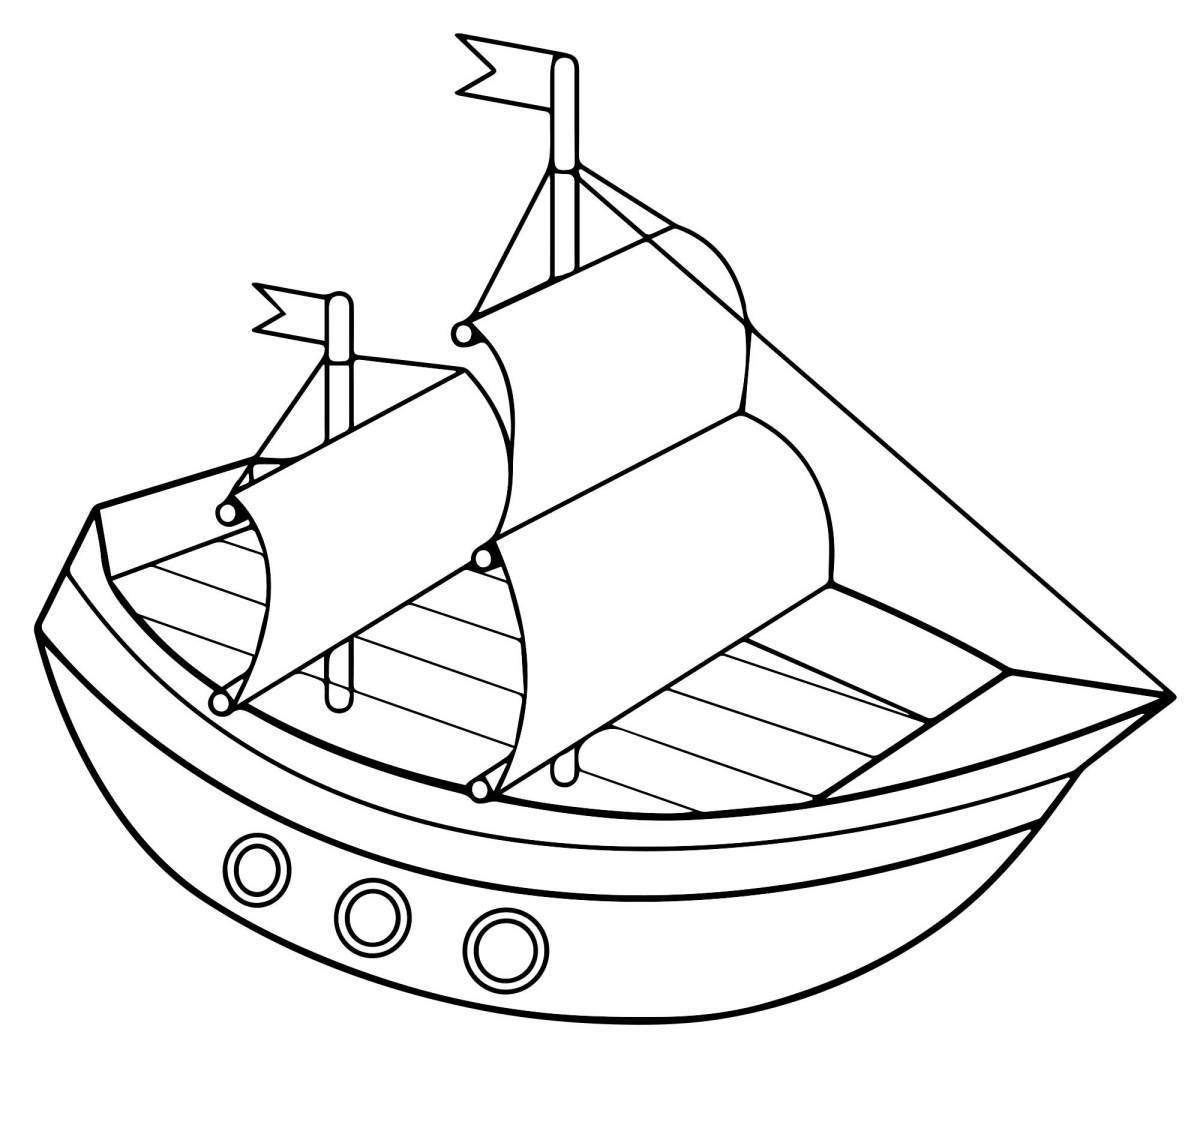 Amazing ship coloring page for kids